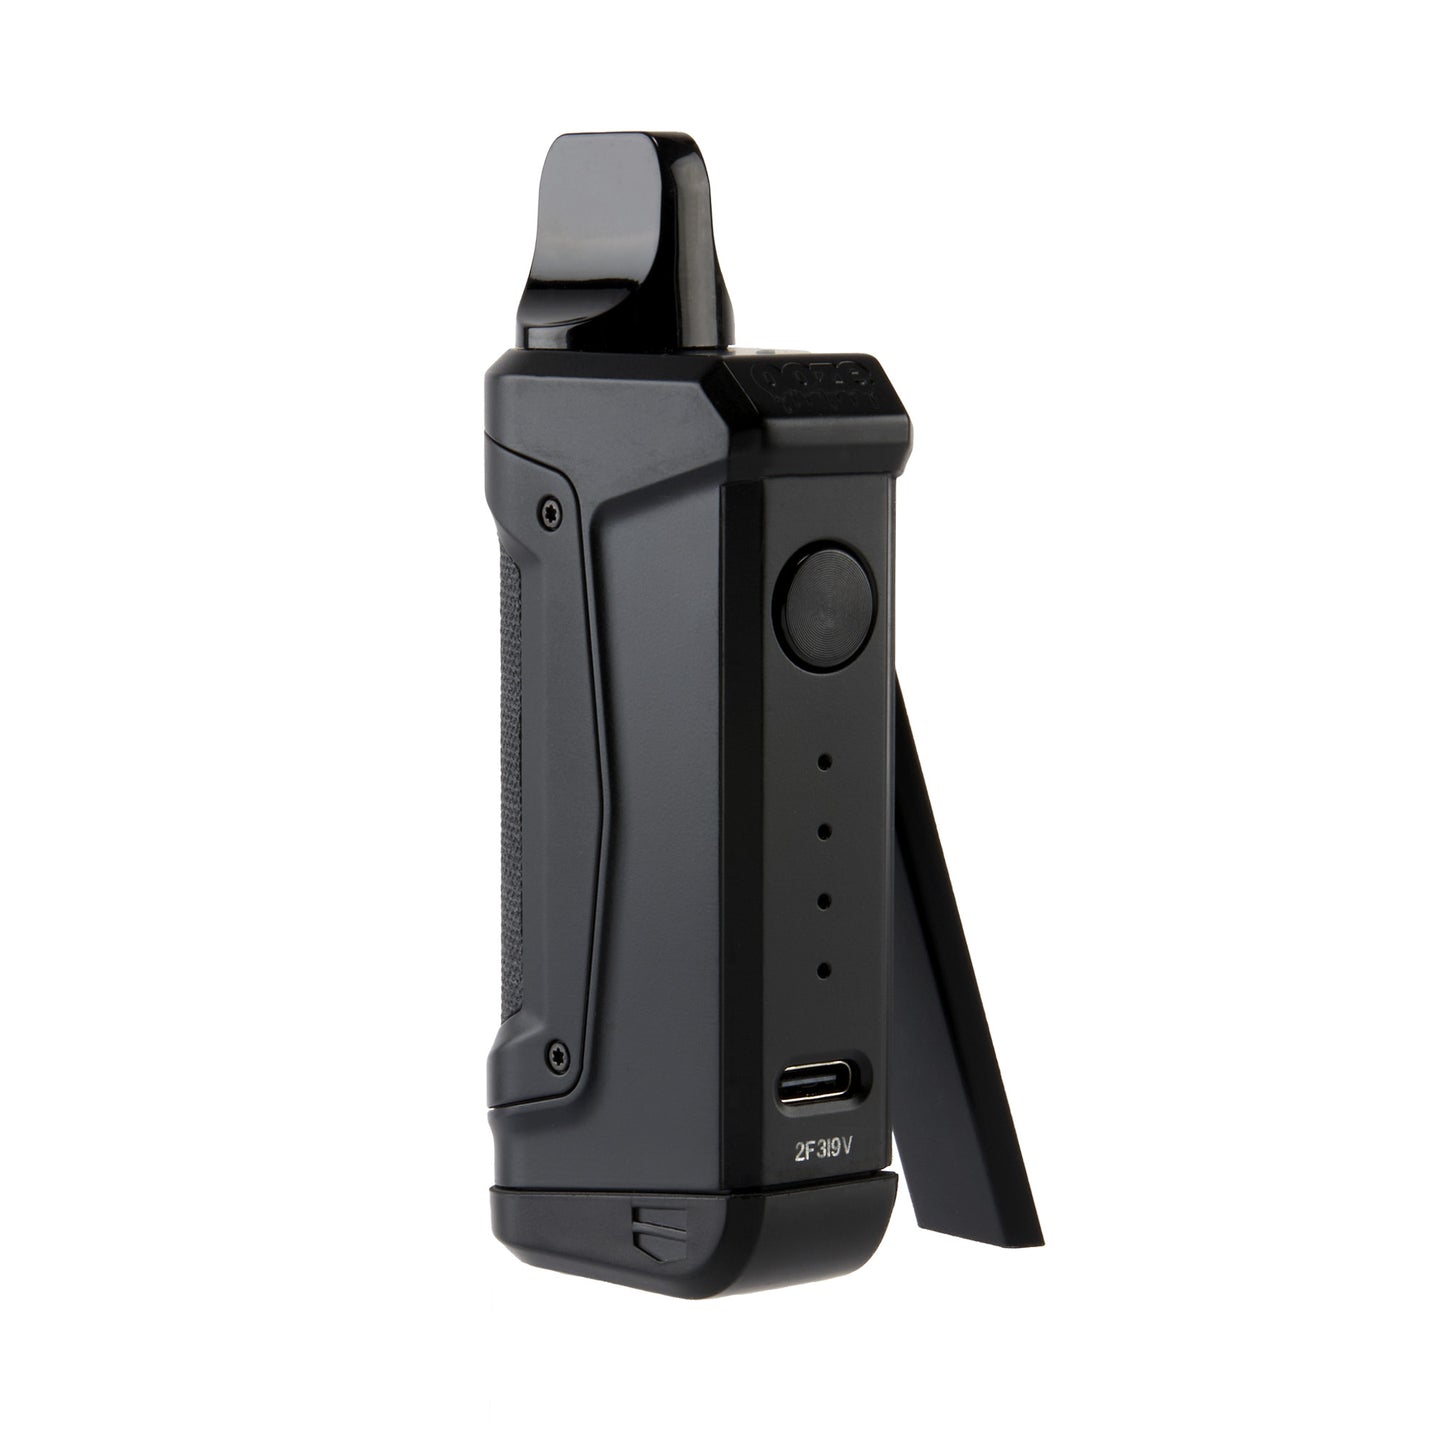 The panther black Ooze Duplex 2 extract vaporizer has the magnetic plate leaning on it to show the interface